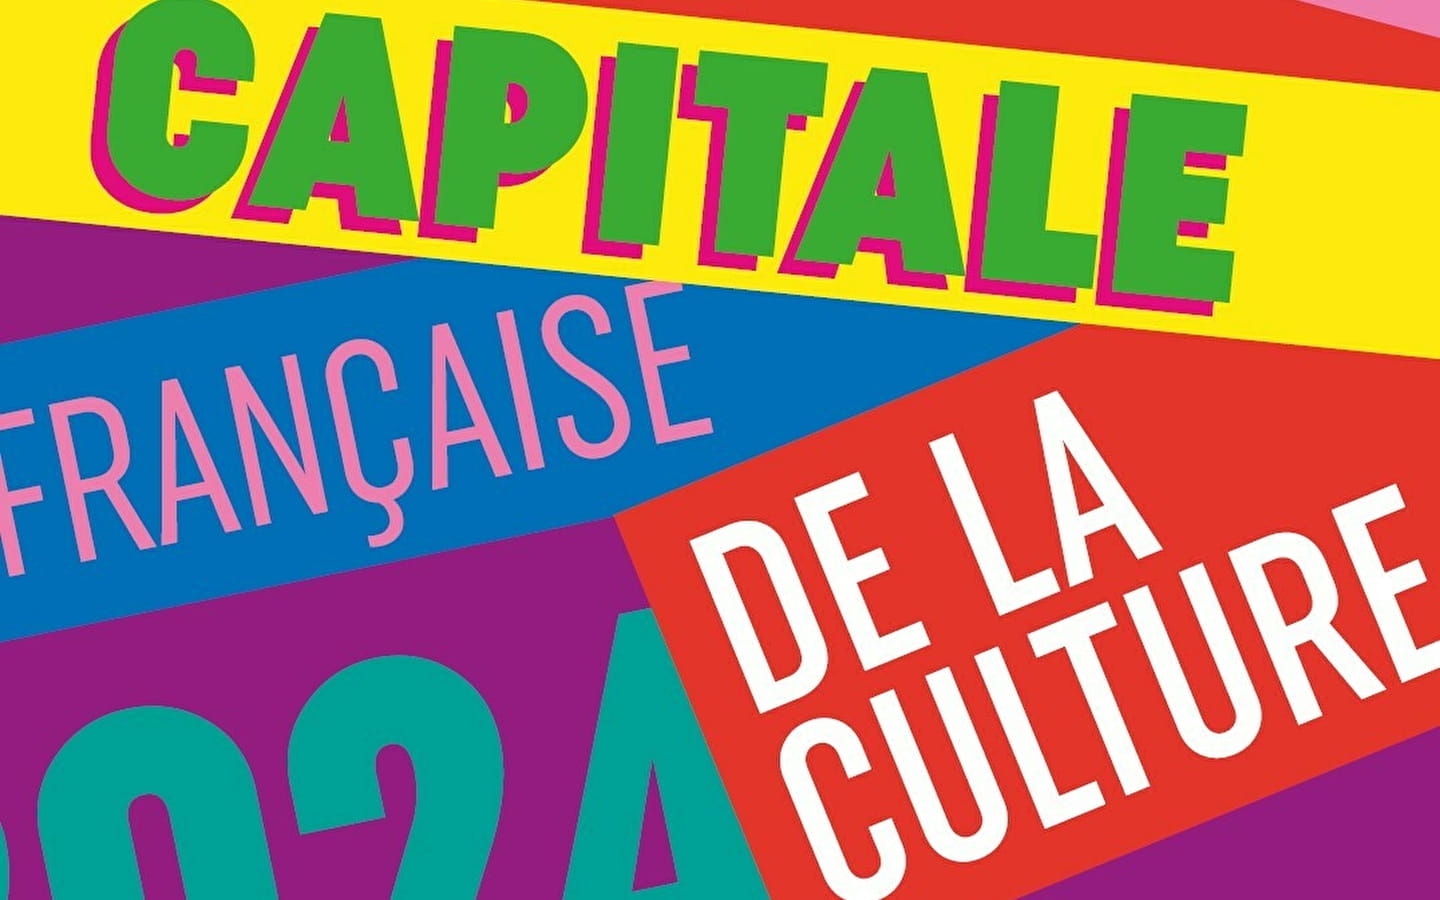 Programme: French Capital of Culture 'season 2